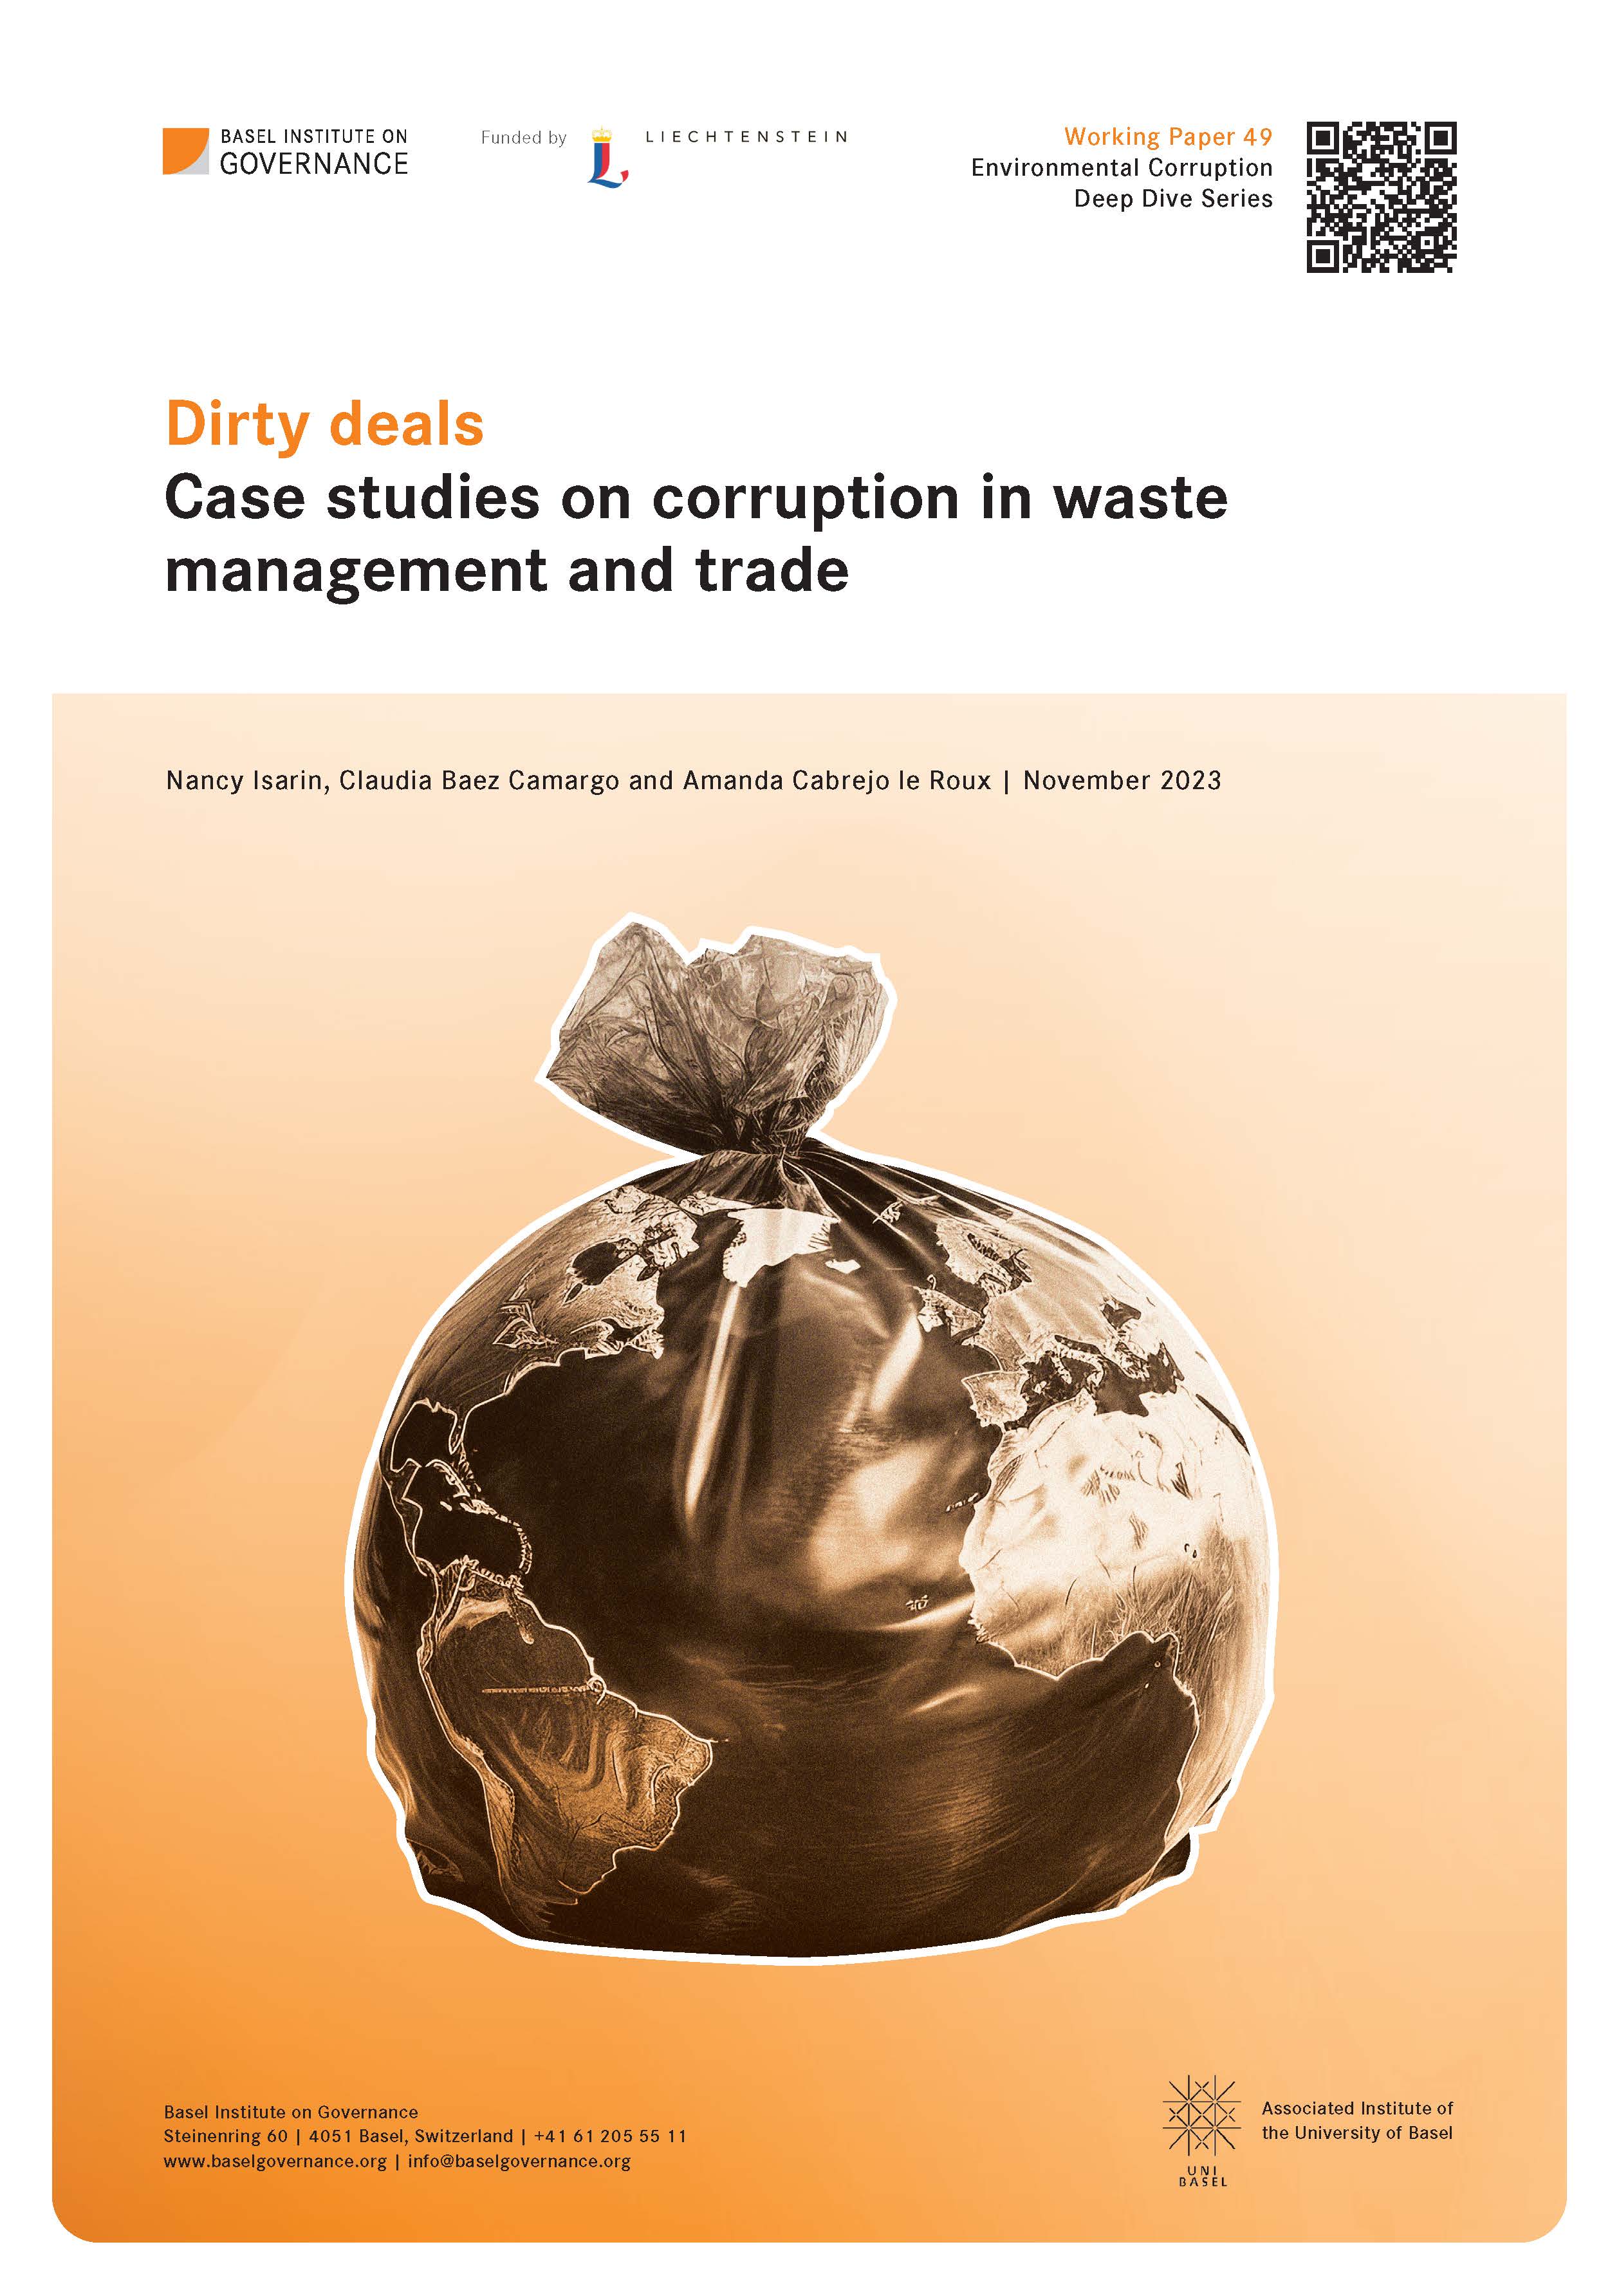 Cover page of waste corruption paper